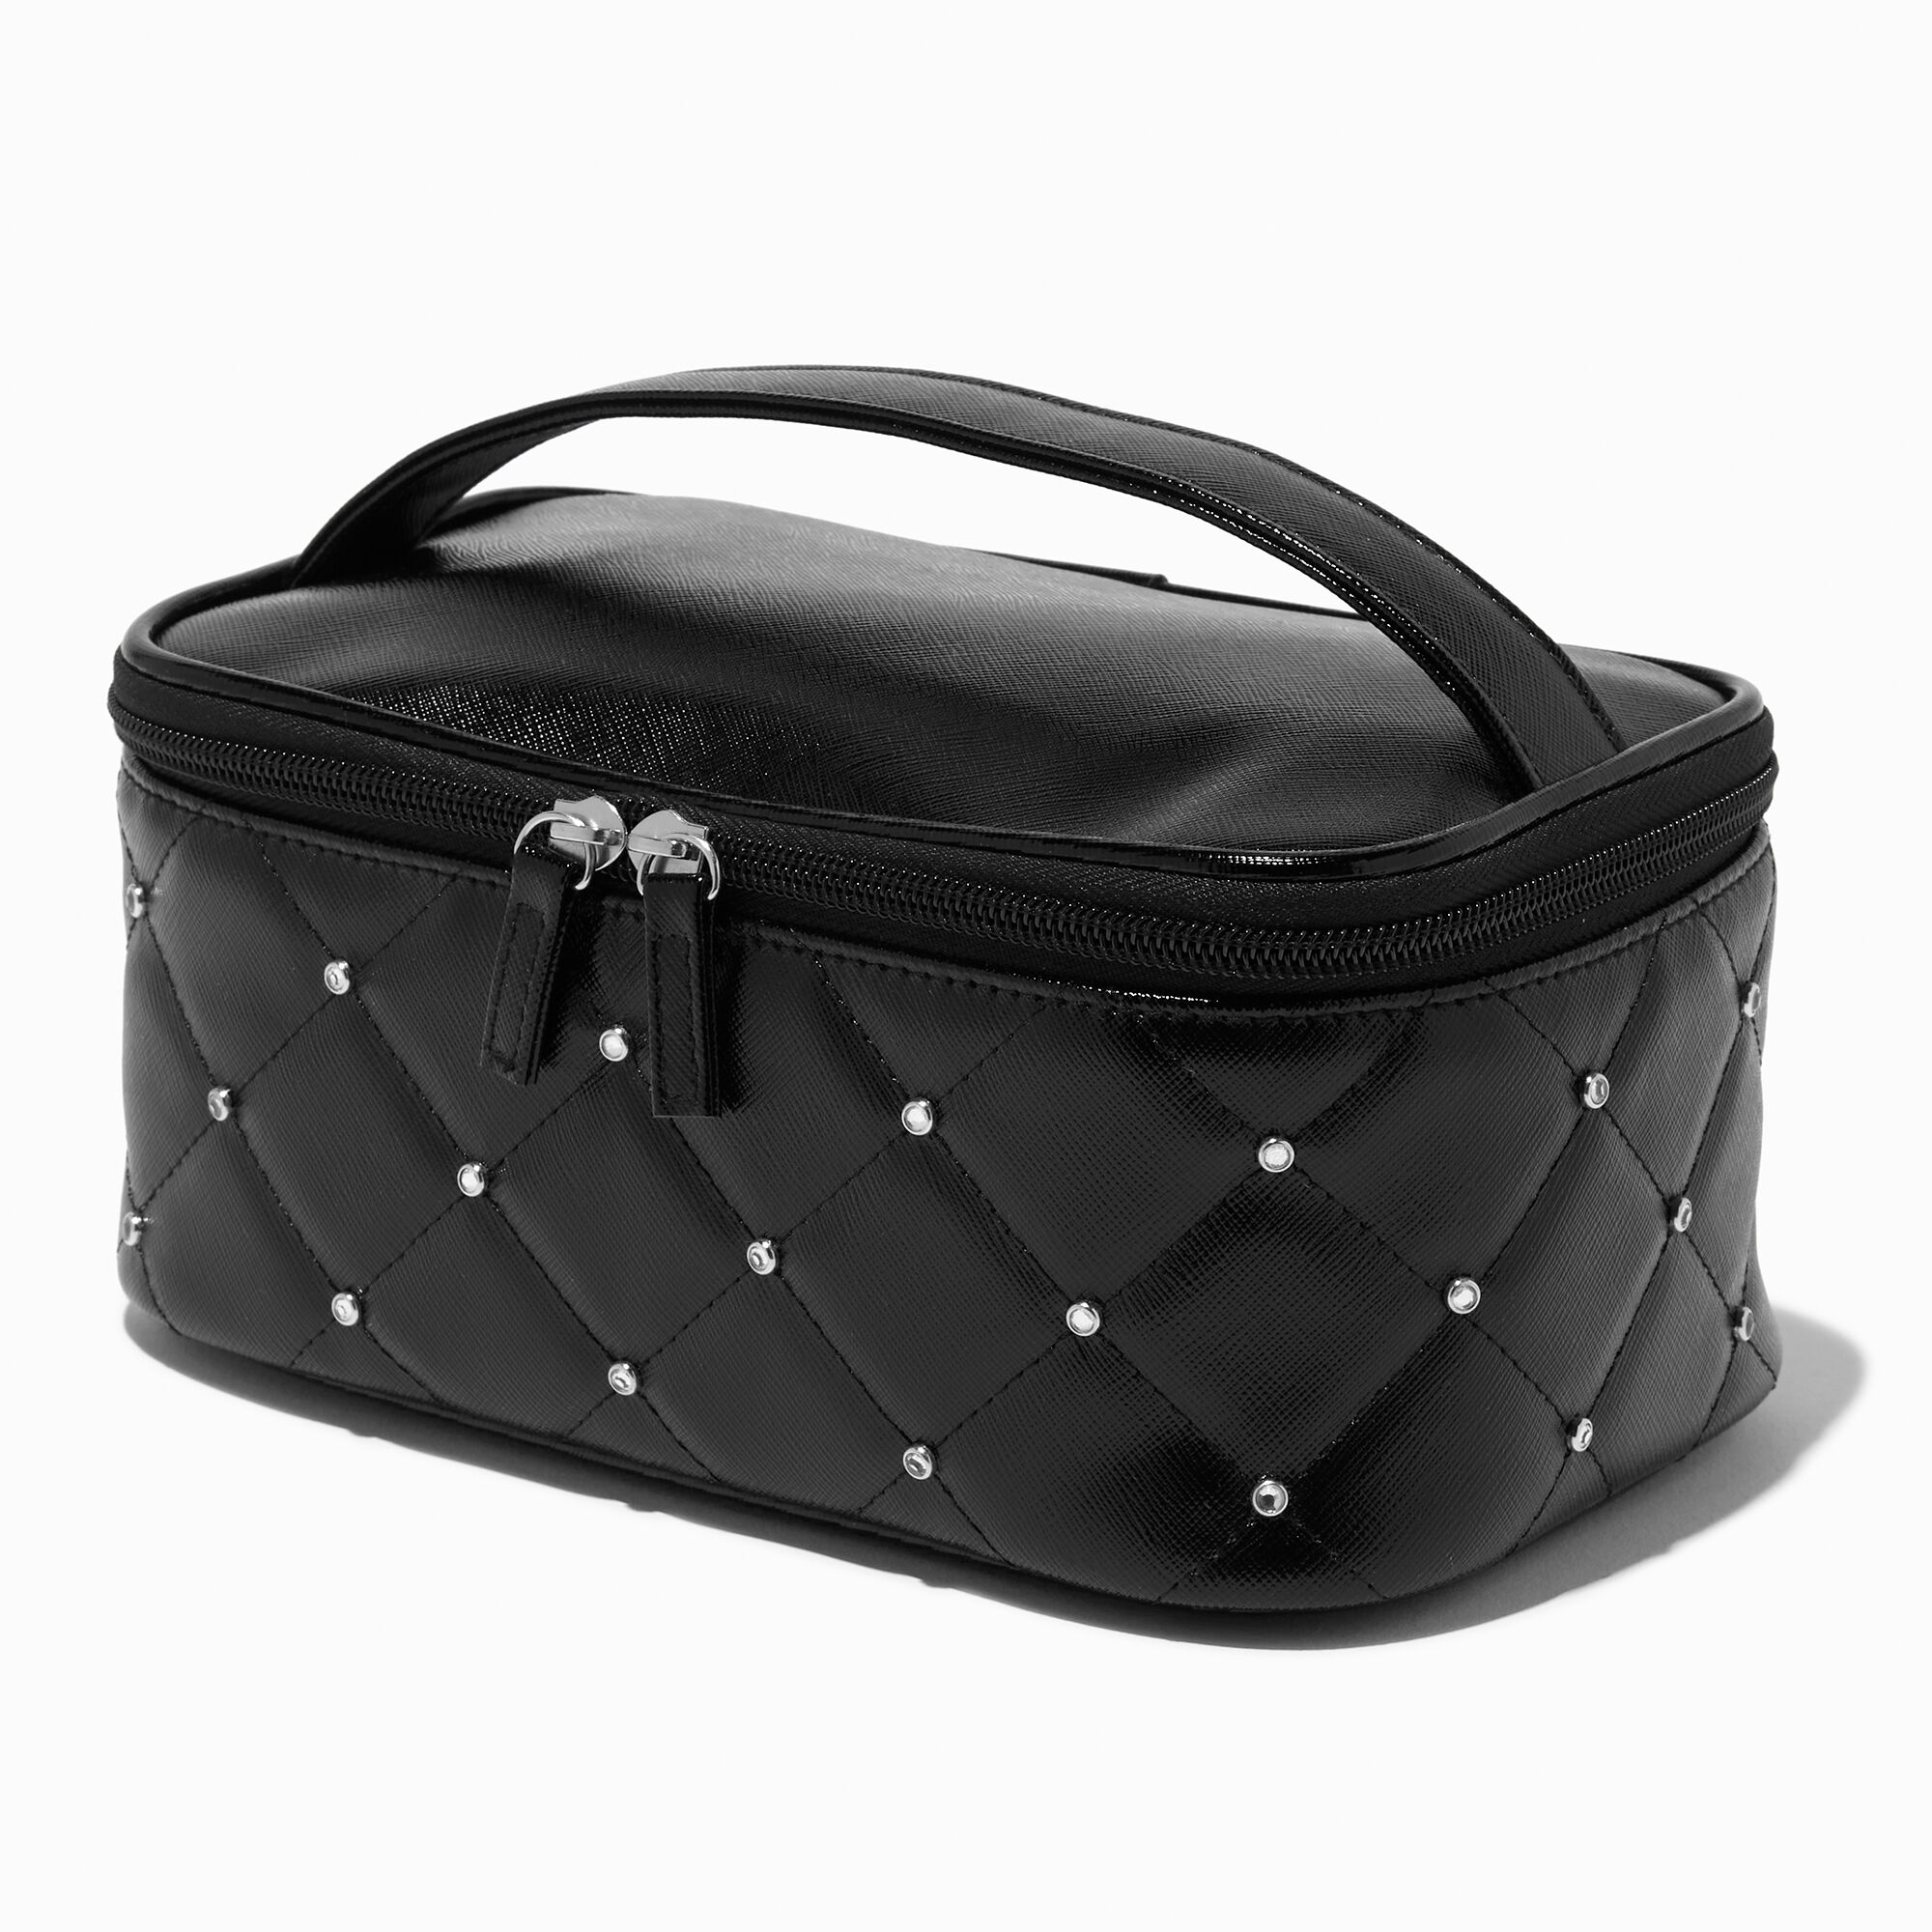 View Claires Quilted Makeup Bag Black information